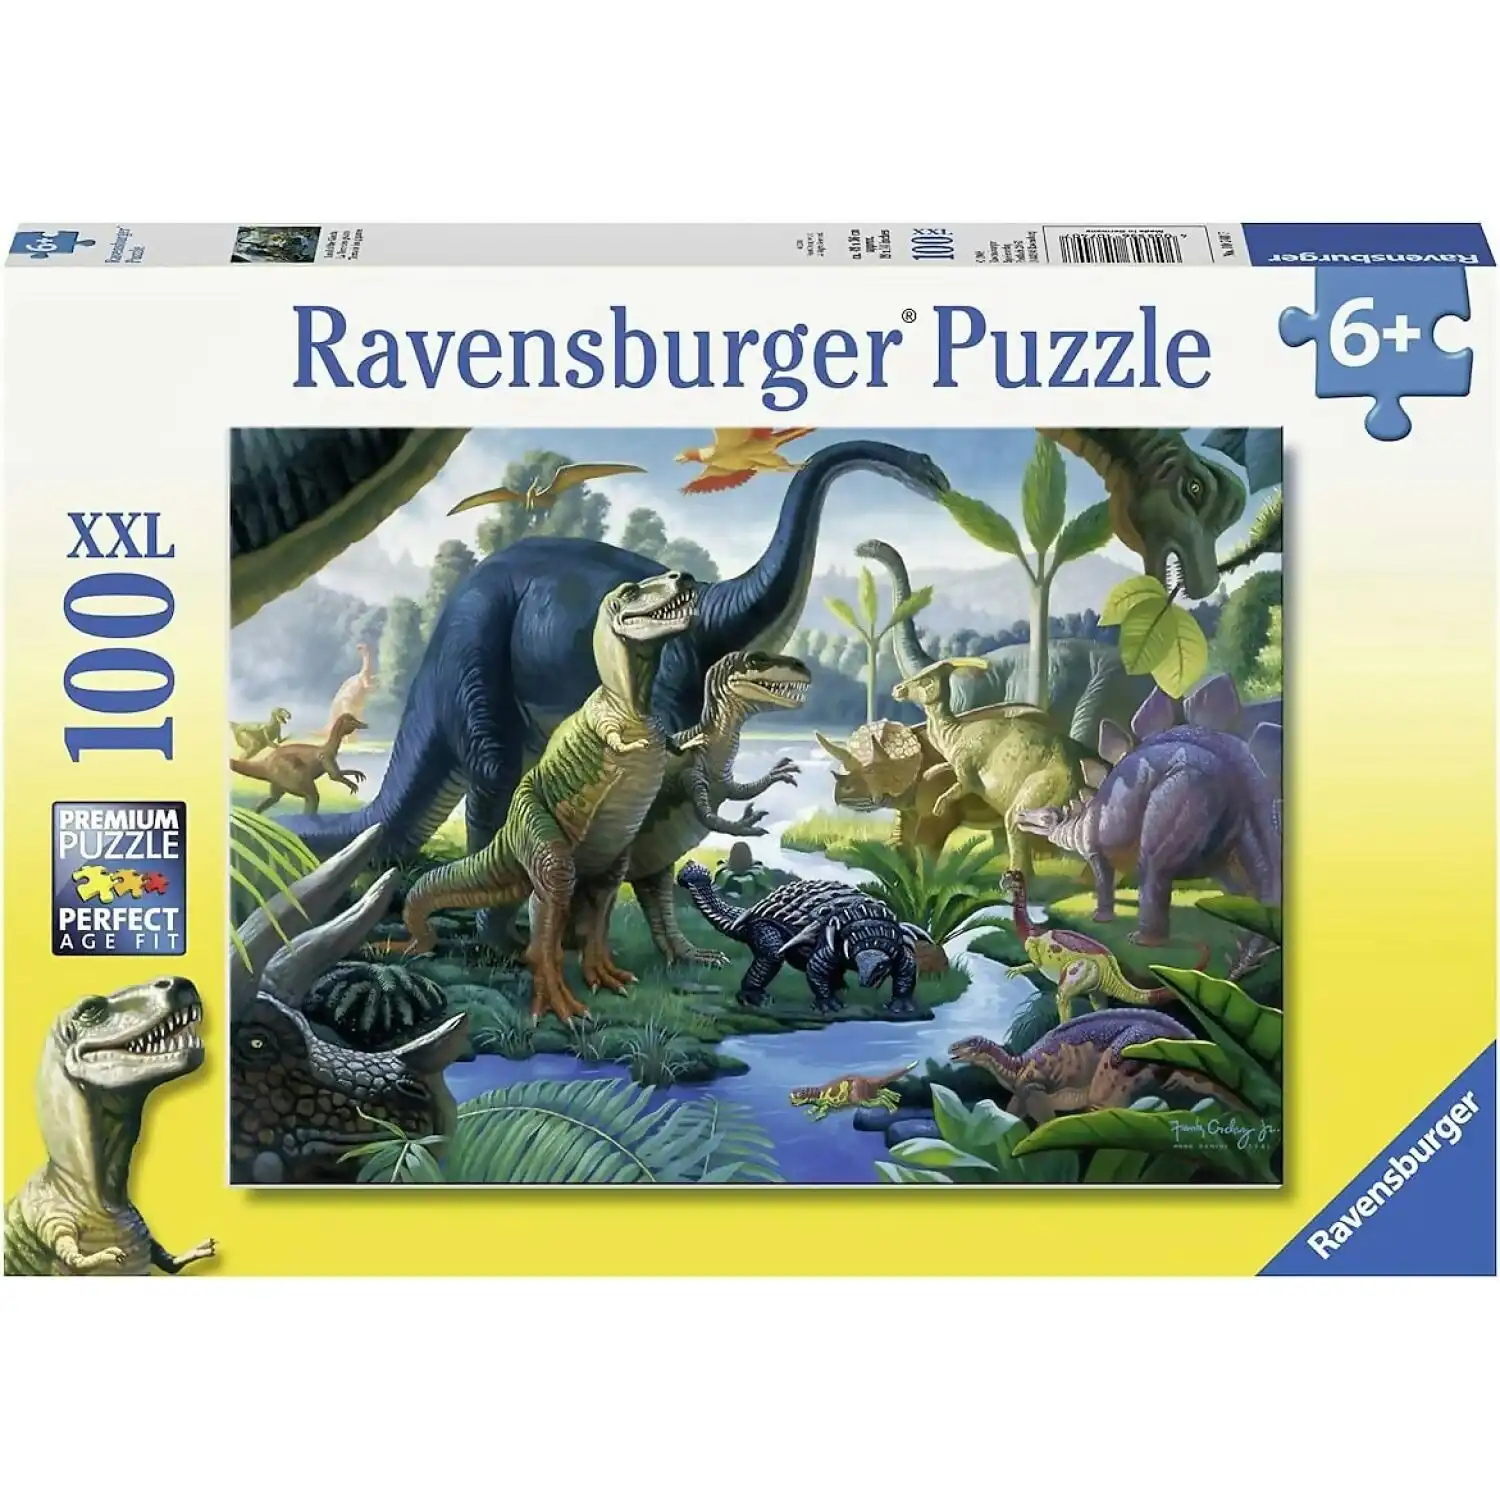 Ravensburger - Land Of The Giants Jigsaw Puzzle Xxl 100pc